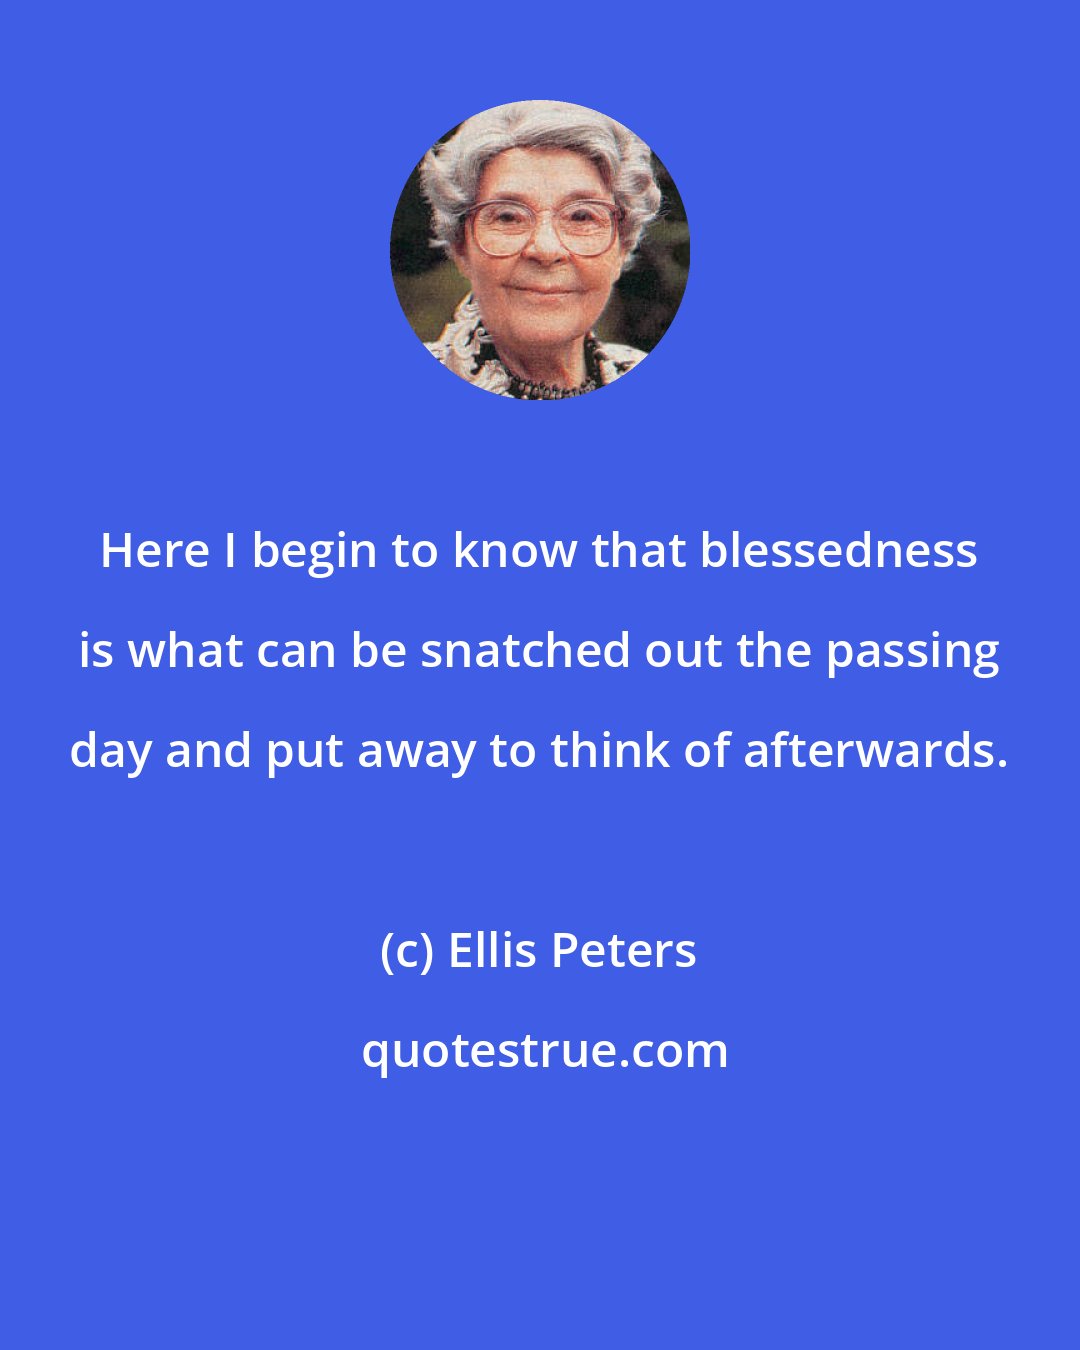 Ellis Peters: Here I begin to know that blessedness is what can be snatched out the passing day and put away to think of afterwards.